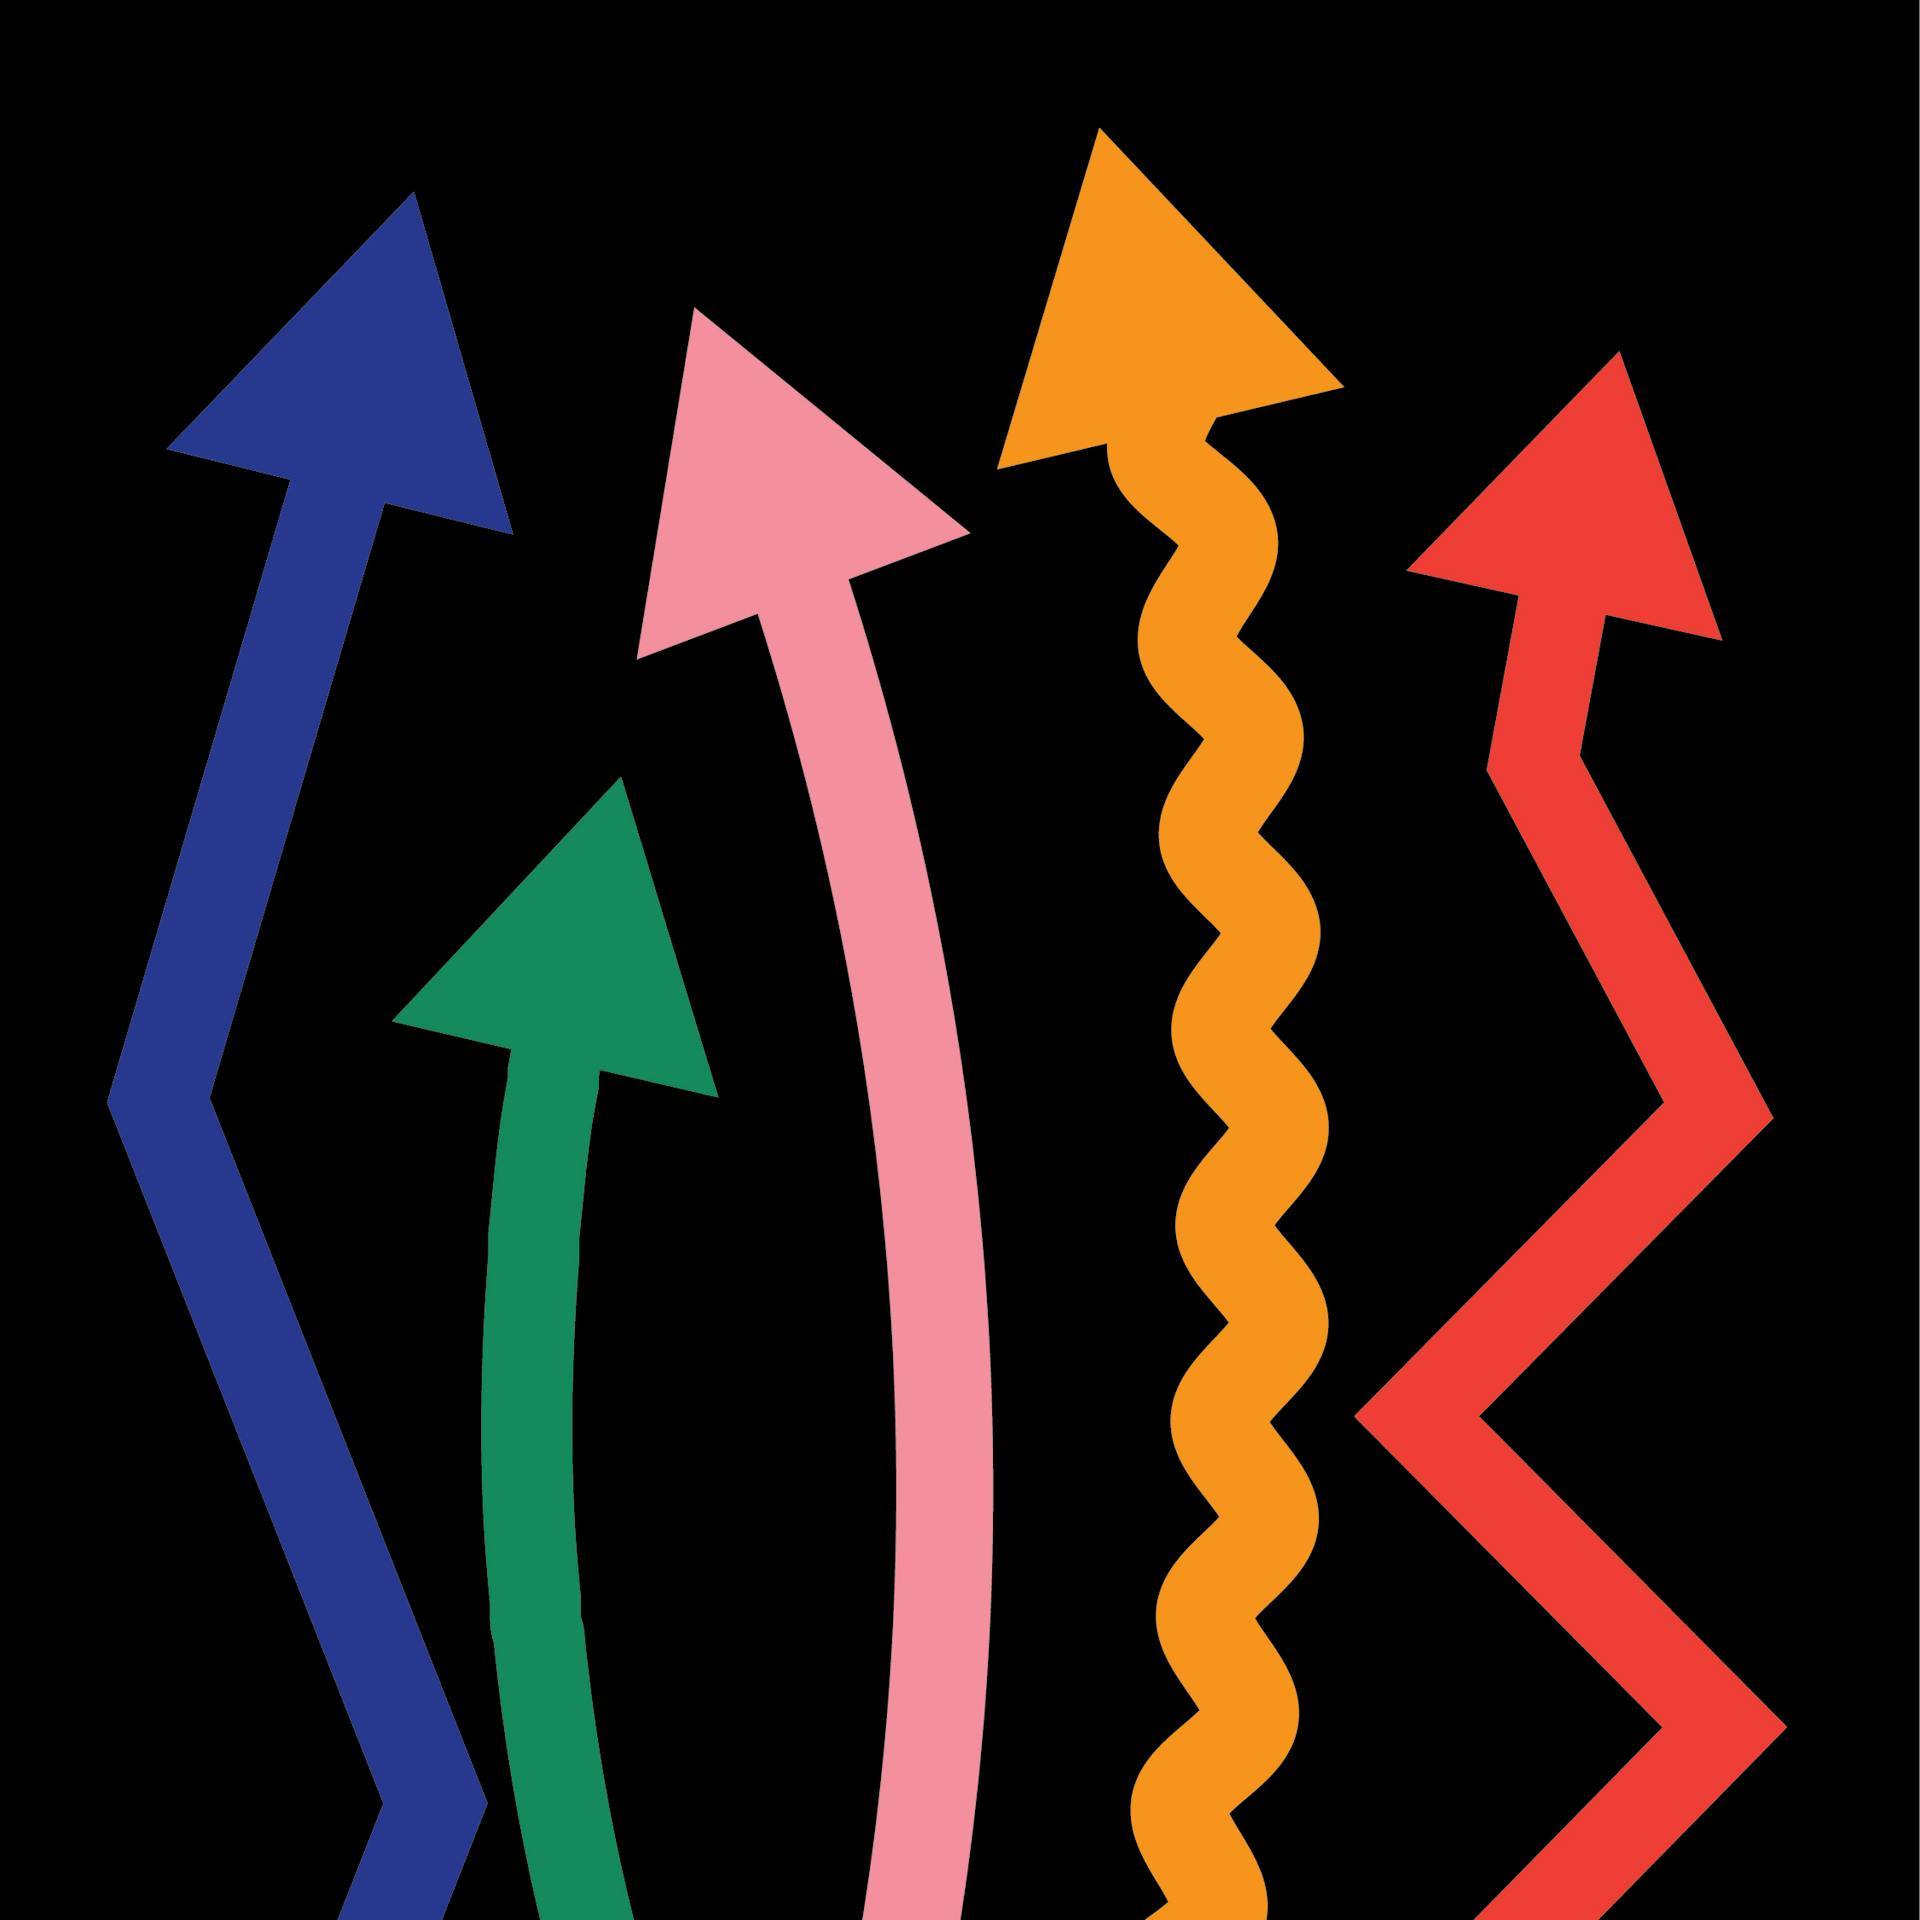 5 colorful arrows going up on a black background